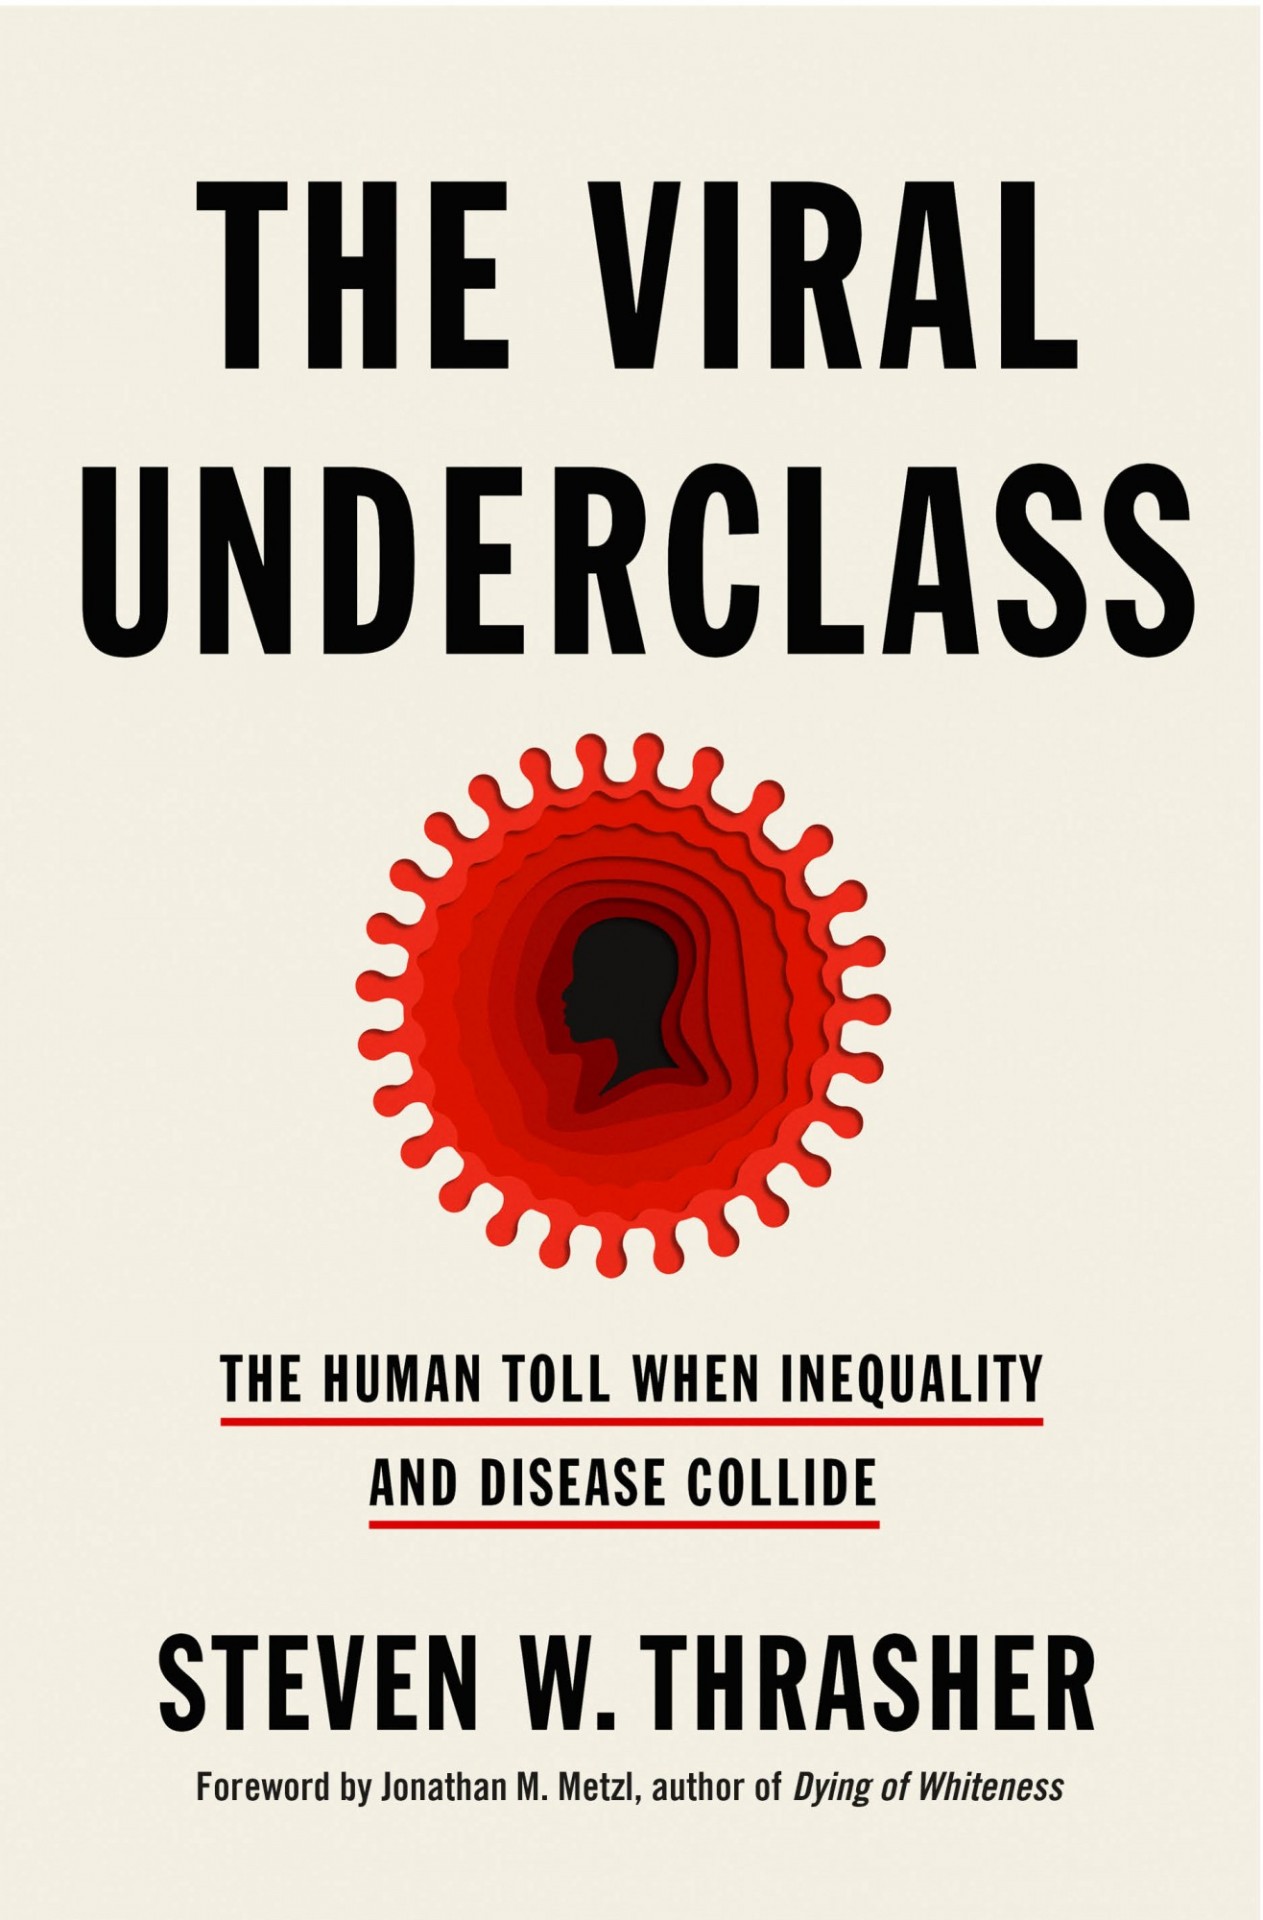 Image of the book cover The Viral Underclass